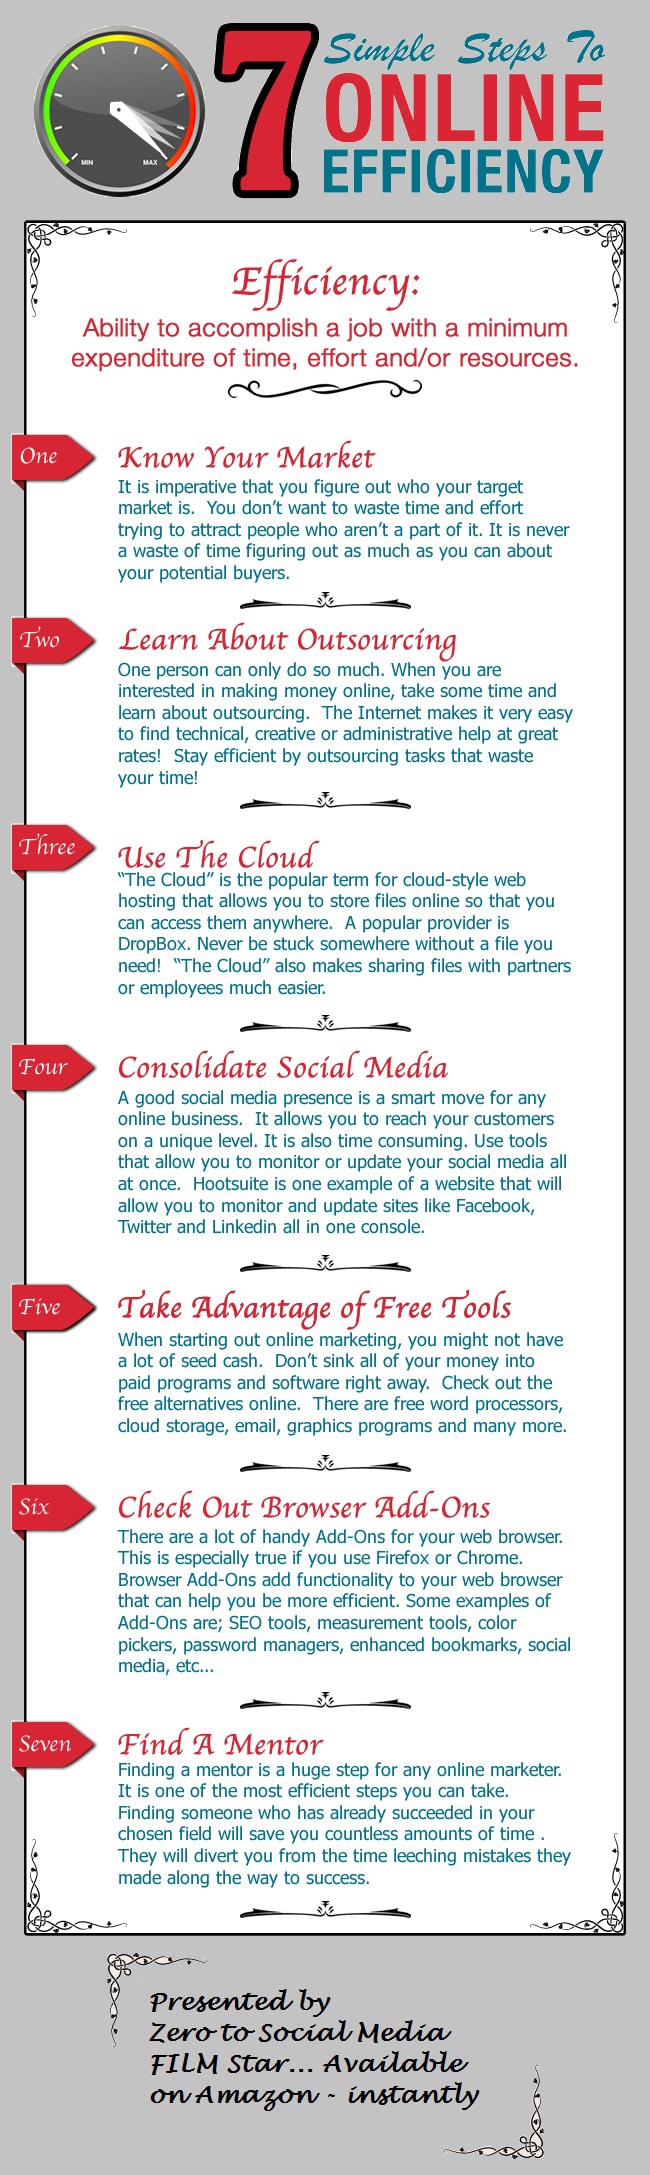 Save Time: 7 Simple Steps To Online Efficiency [Infographic]